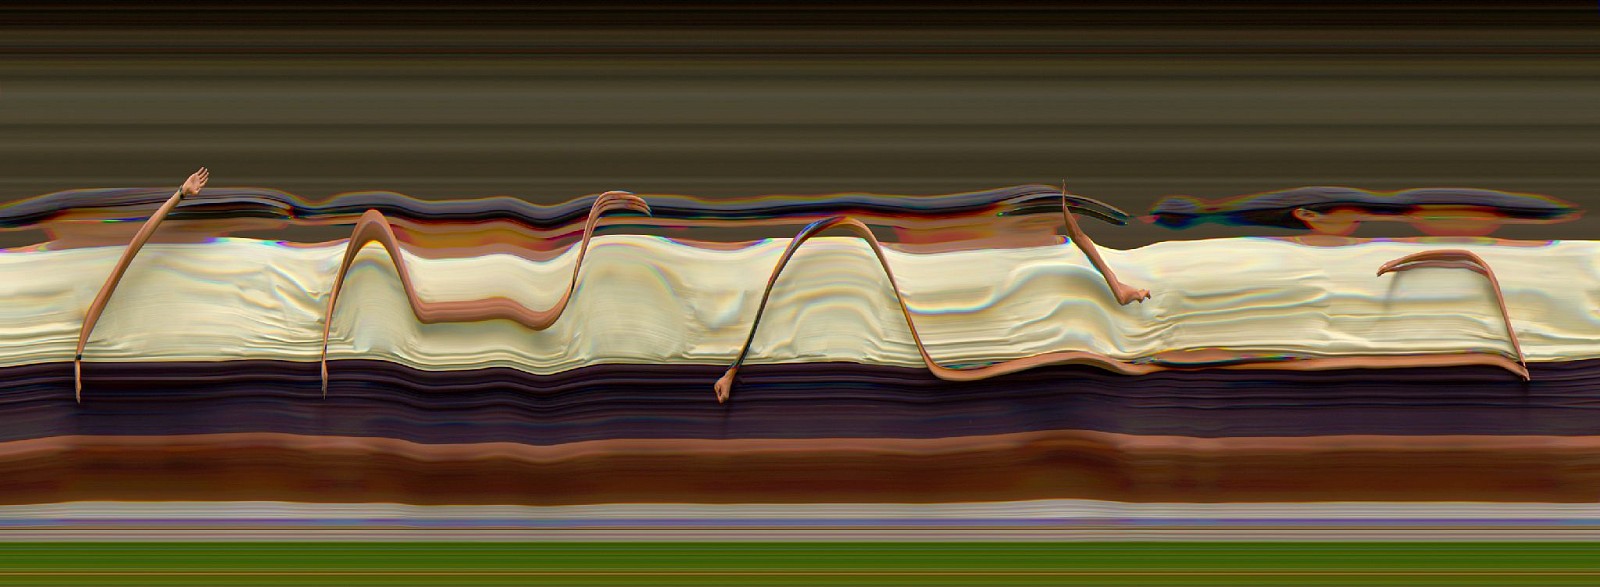 Jay Mark Johnson, TAICHI MOTION STUDY 154, 2005 Los Angeles CA
archival pigment on paper, mounted on aluminum, 40 x 109 in. (101.6 x 276.9 cm)